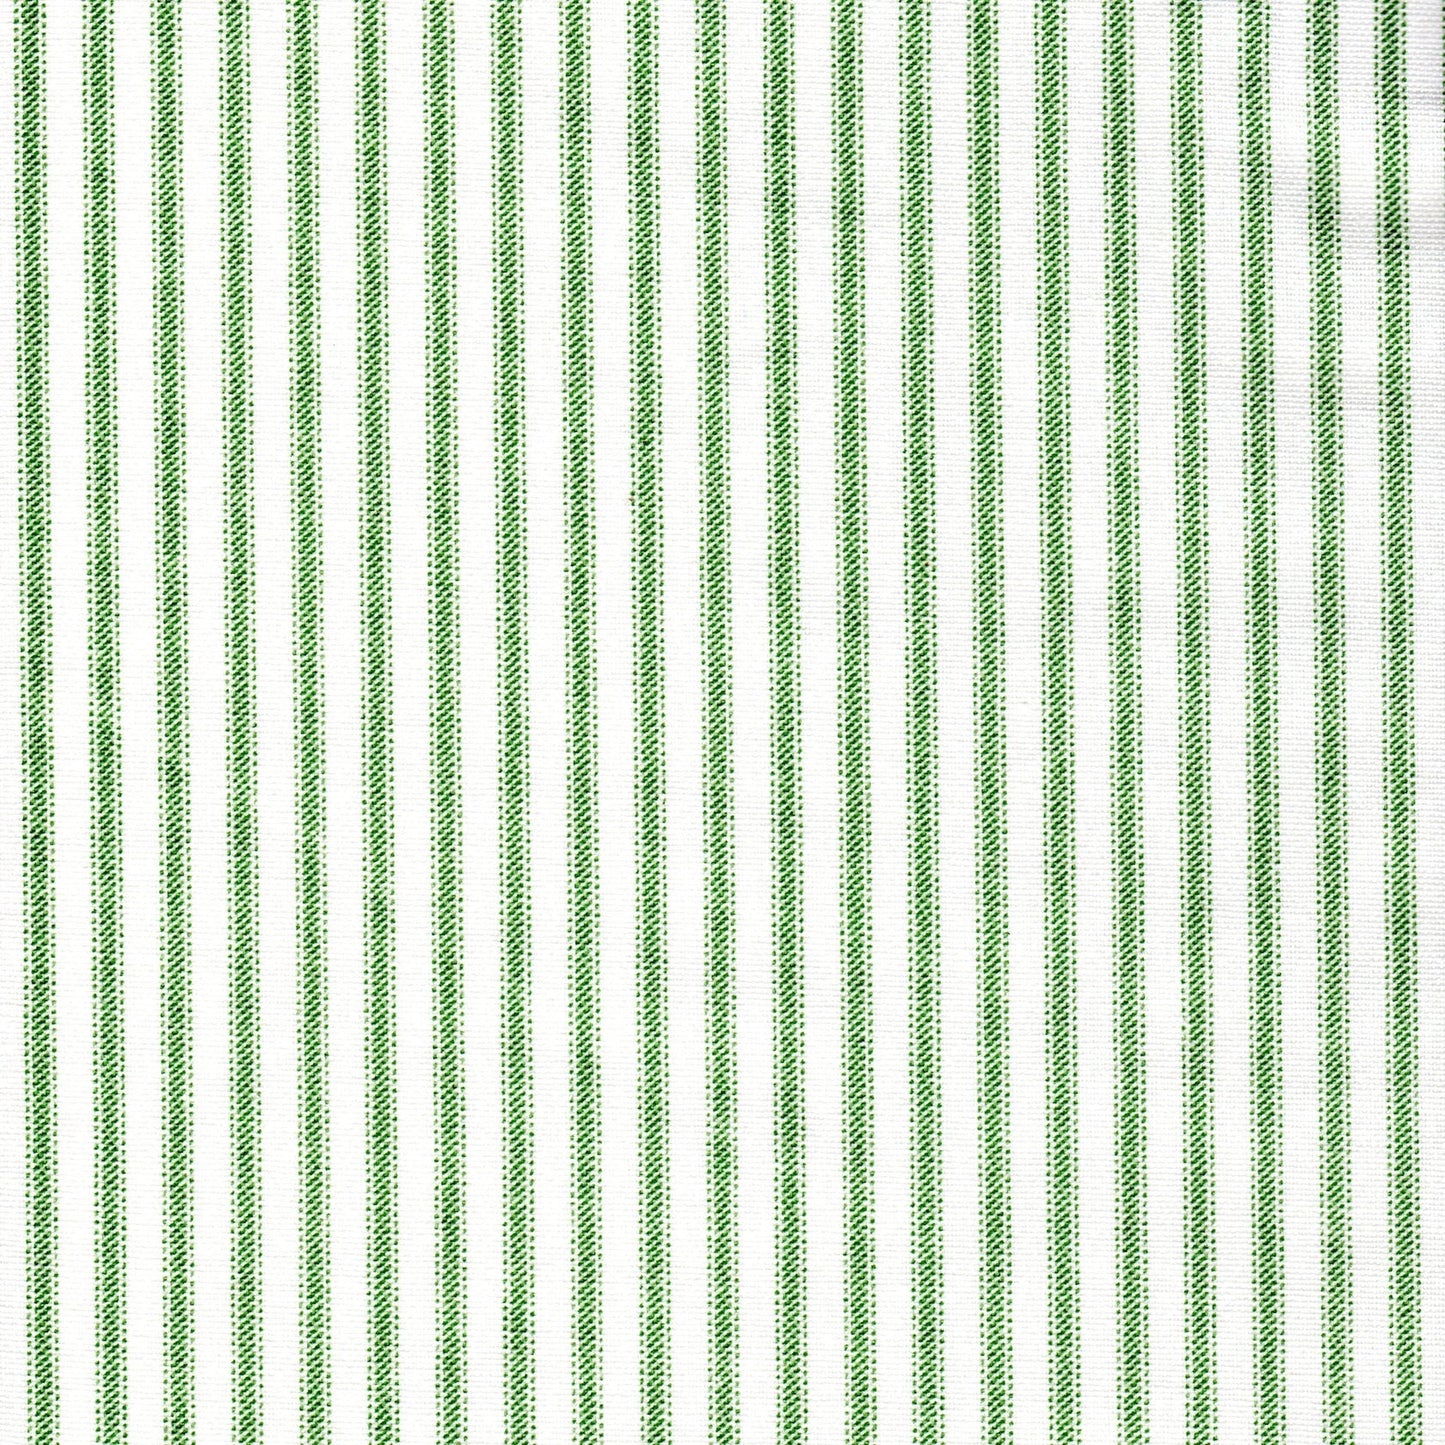 round tablecloth in Classic Pine Green Ticking Stripe on White